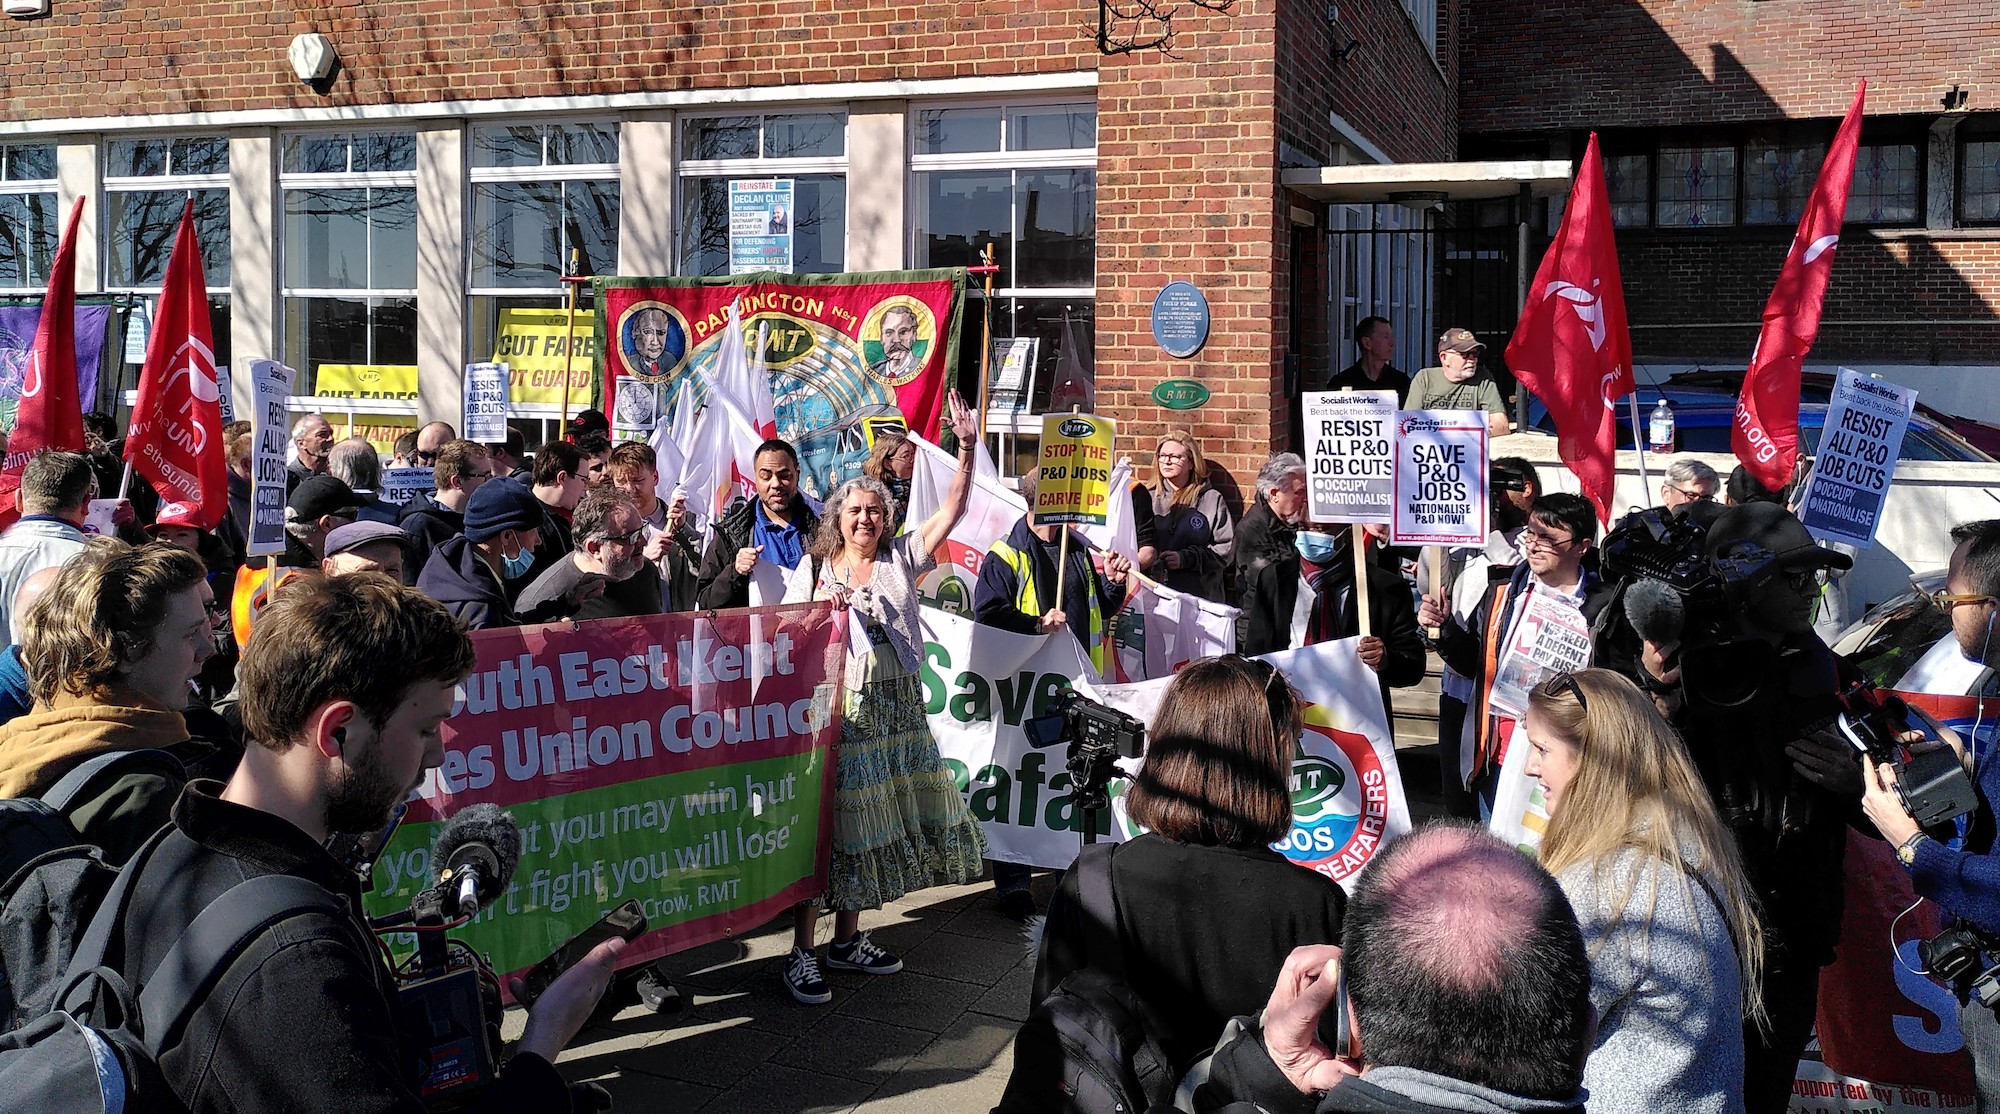 RMT protest over P&O sackings